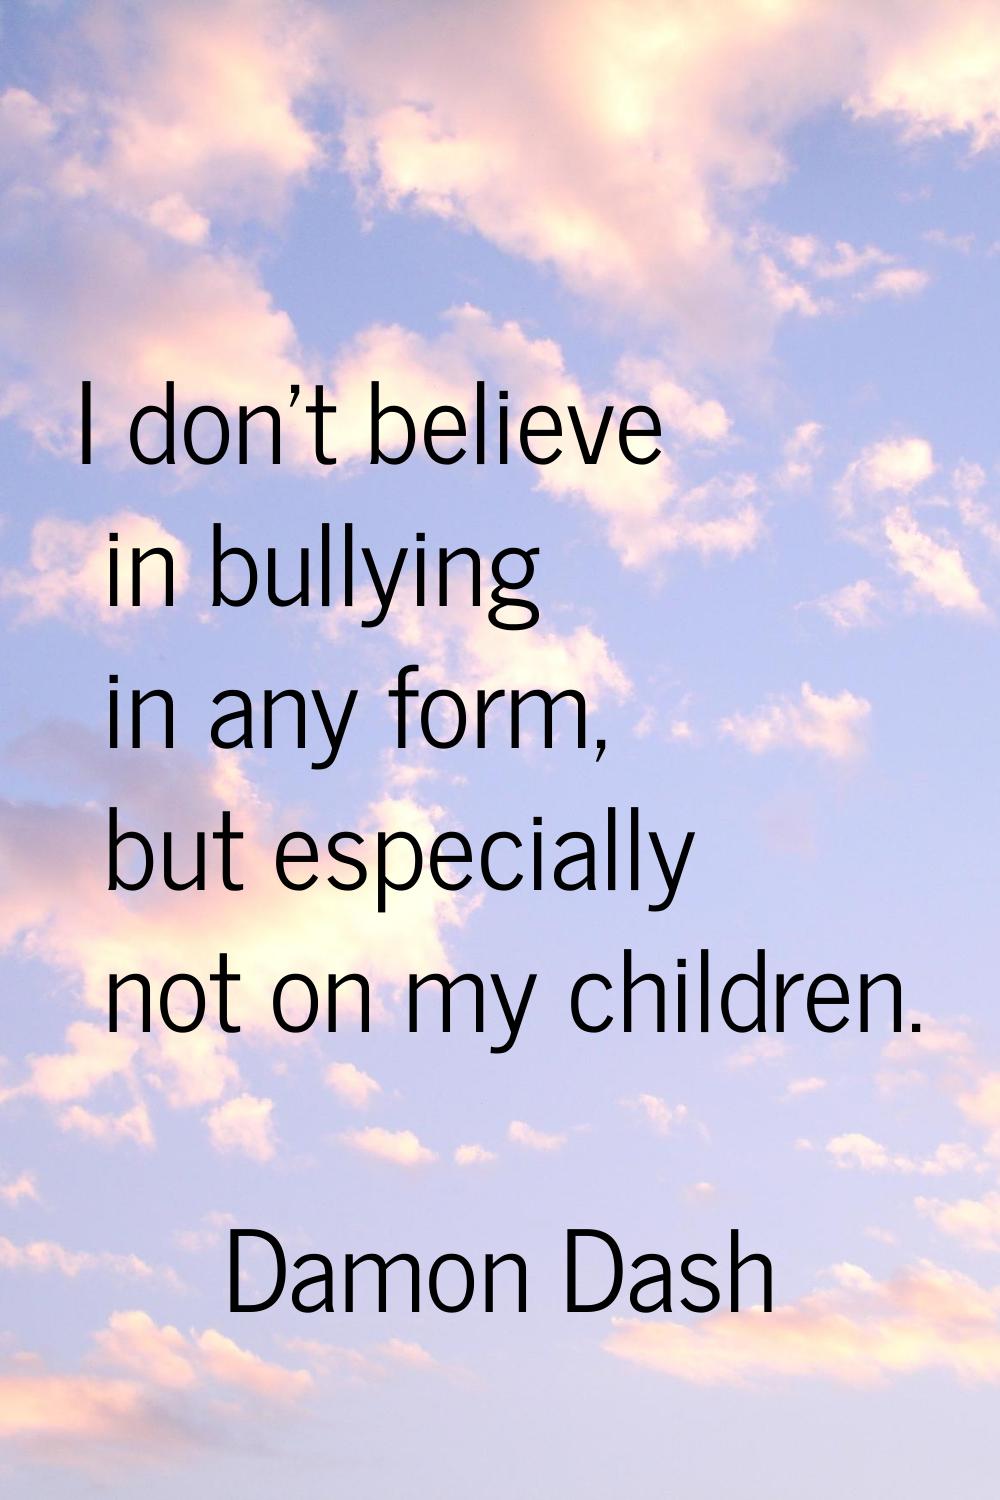 I don't believe in bullying in any form, but especially not on my children.